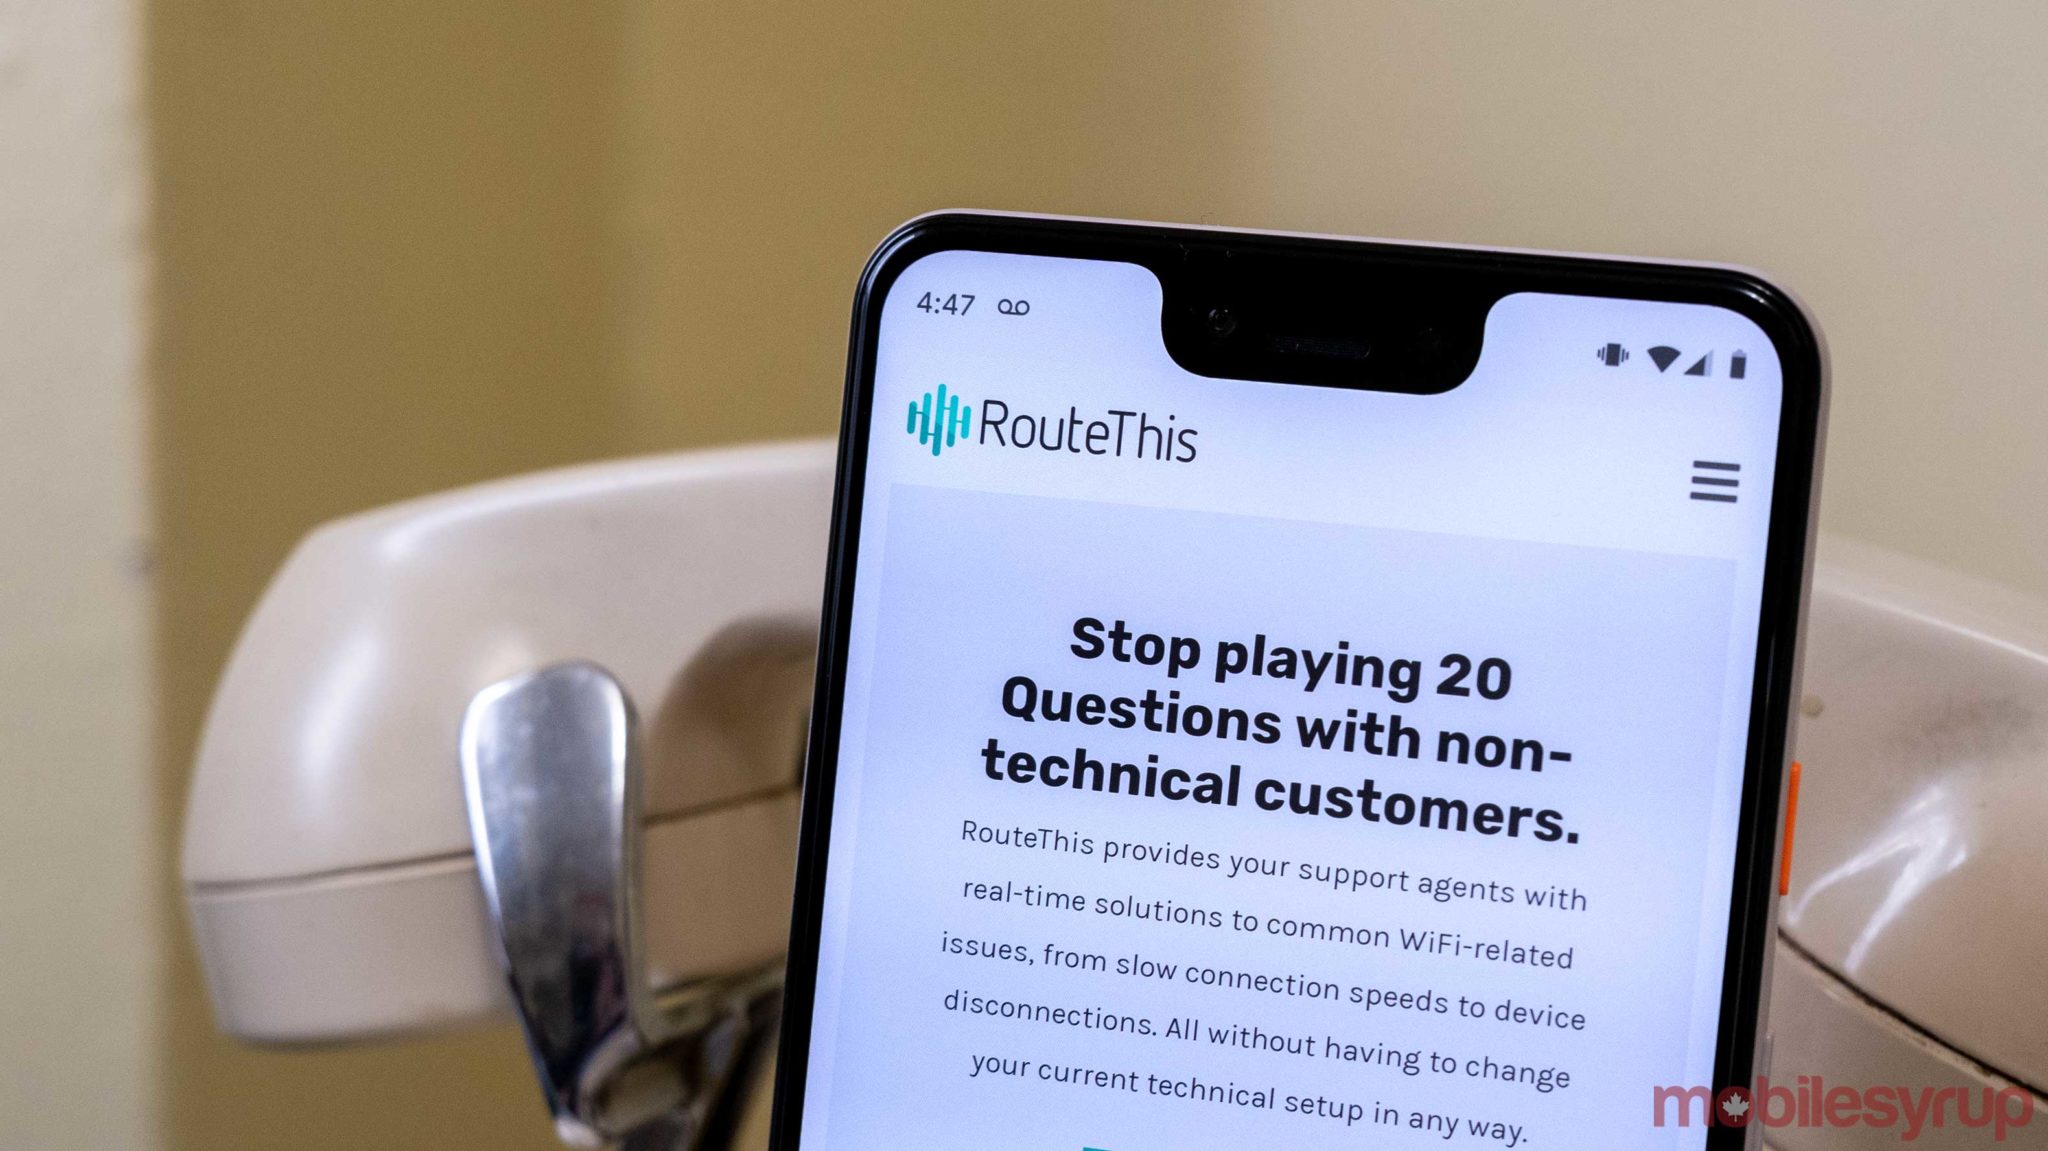 Kitchener-based RouteThis wants to end the need for in-home telecom service calls